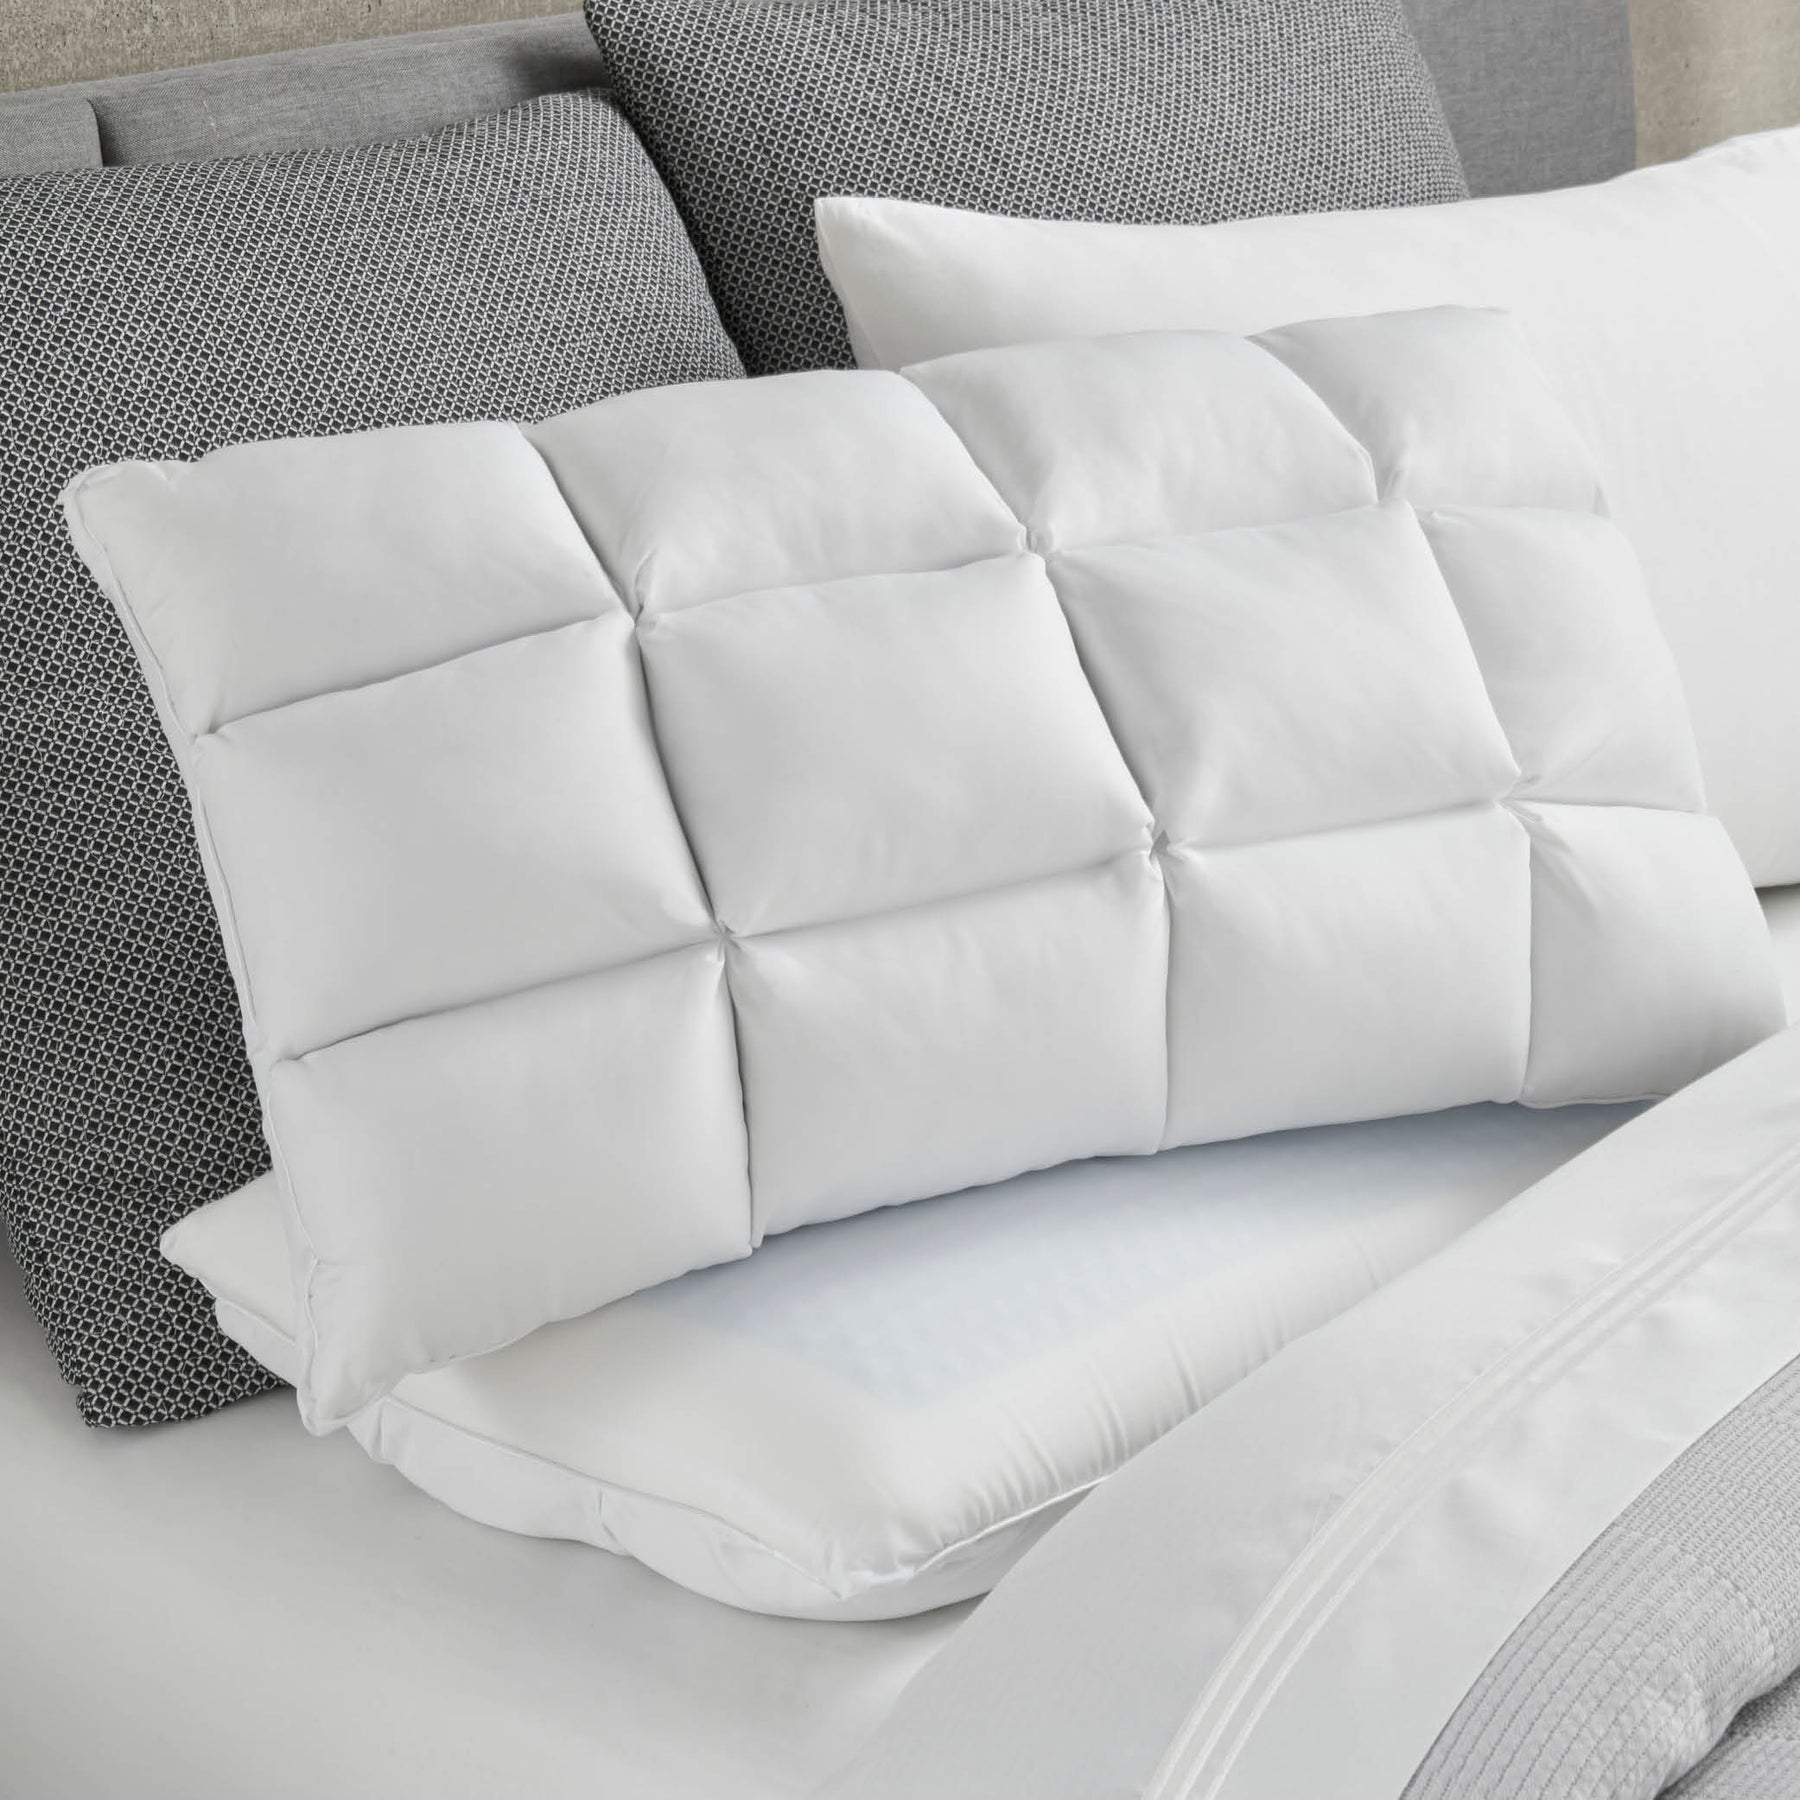 Image of a Cooling SoftCell® Chill Pillow on a gray and white bed with the SoftCell side facing forward